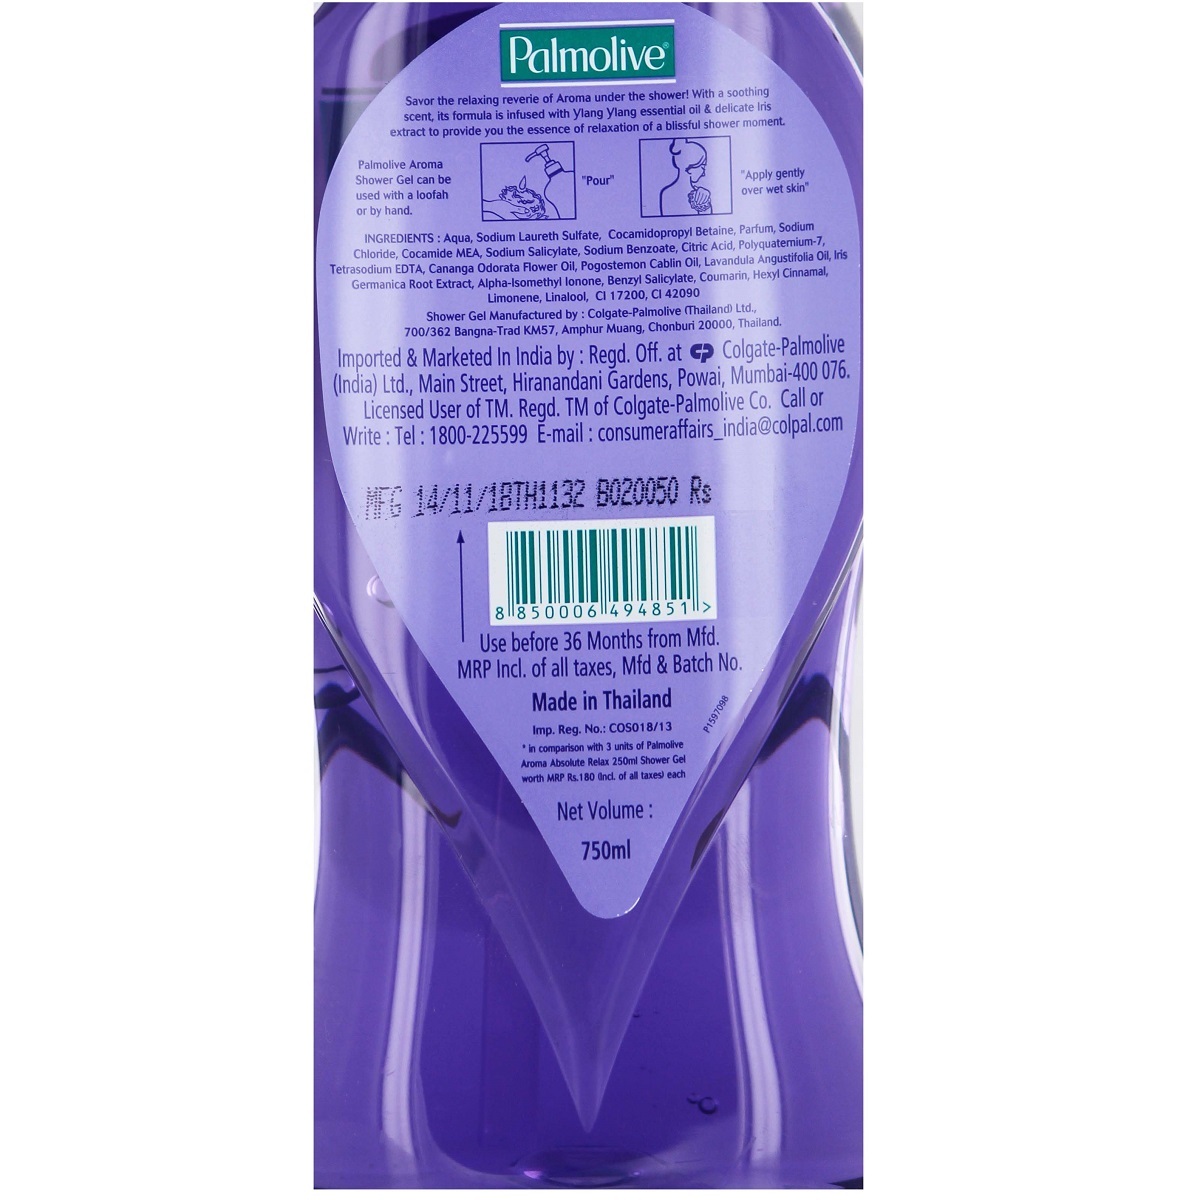 Palmolive Shower Gel Absolute Relax 750ml